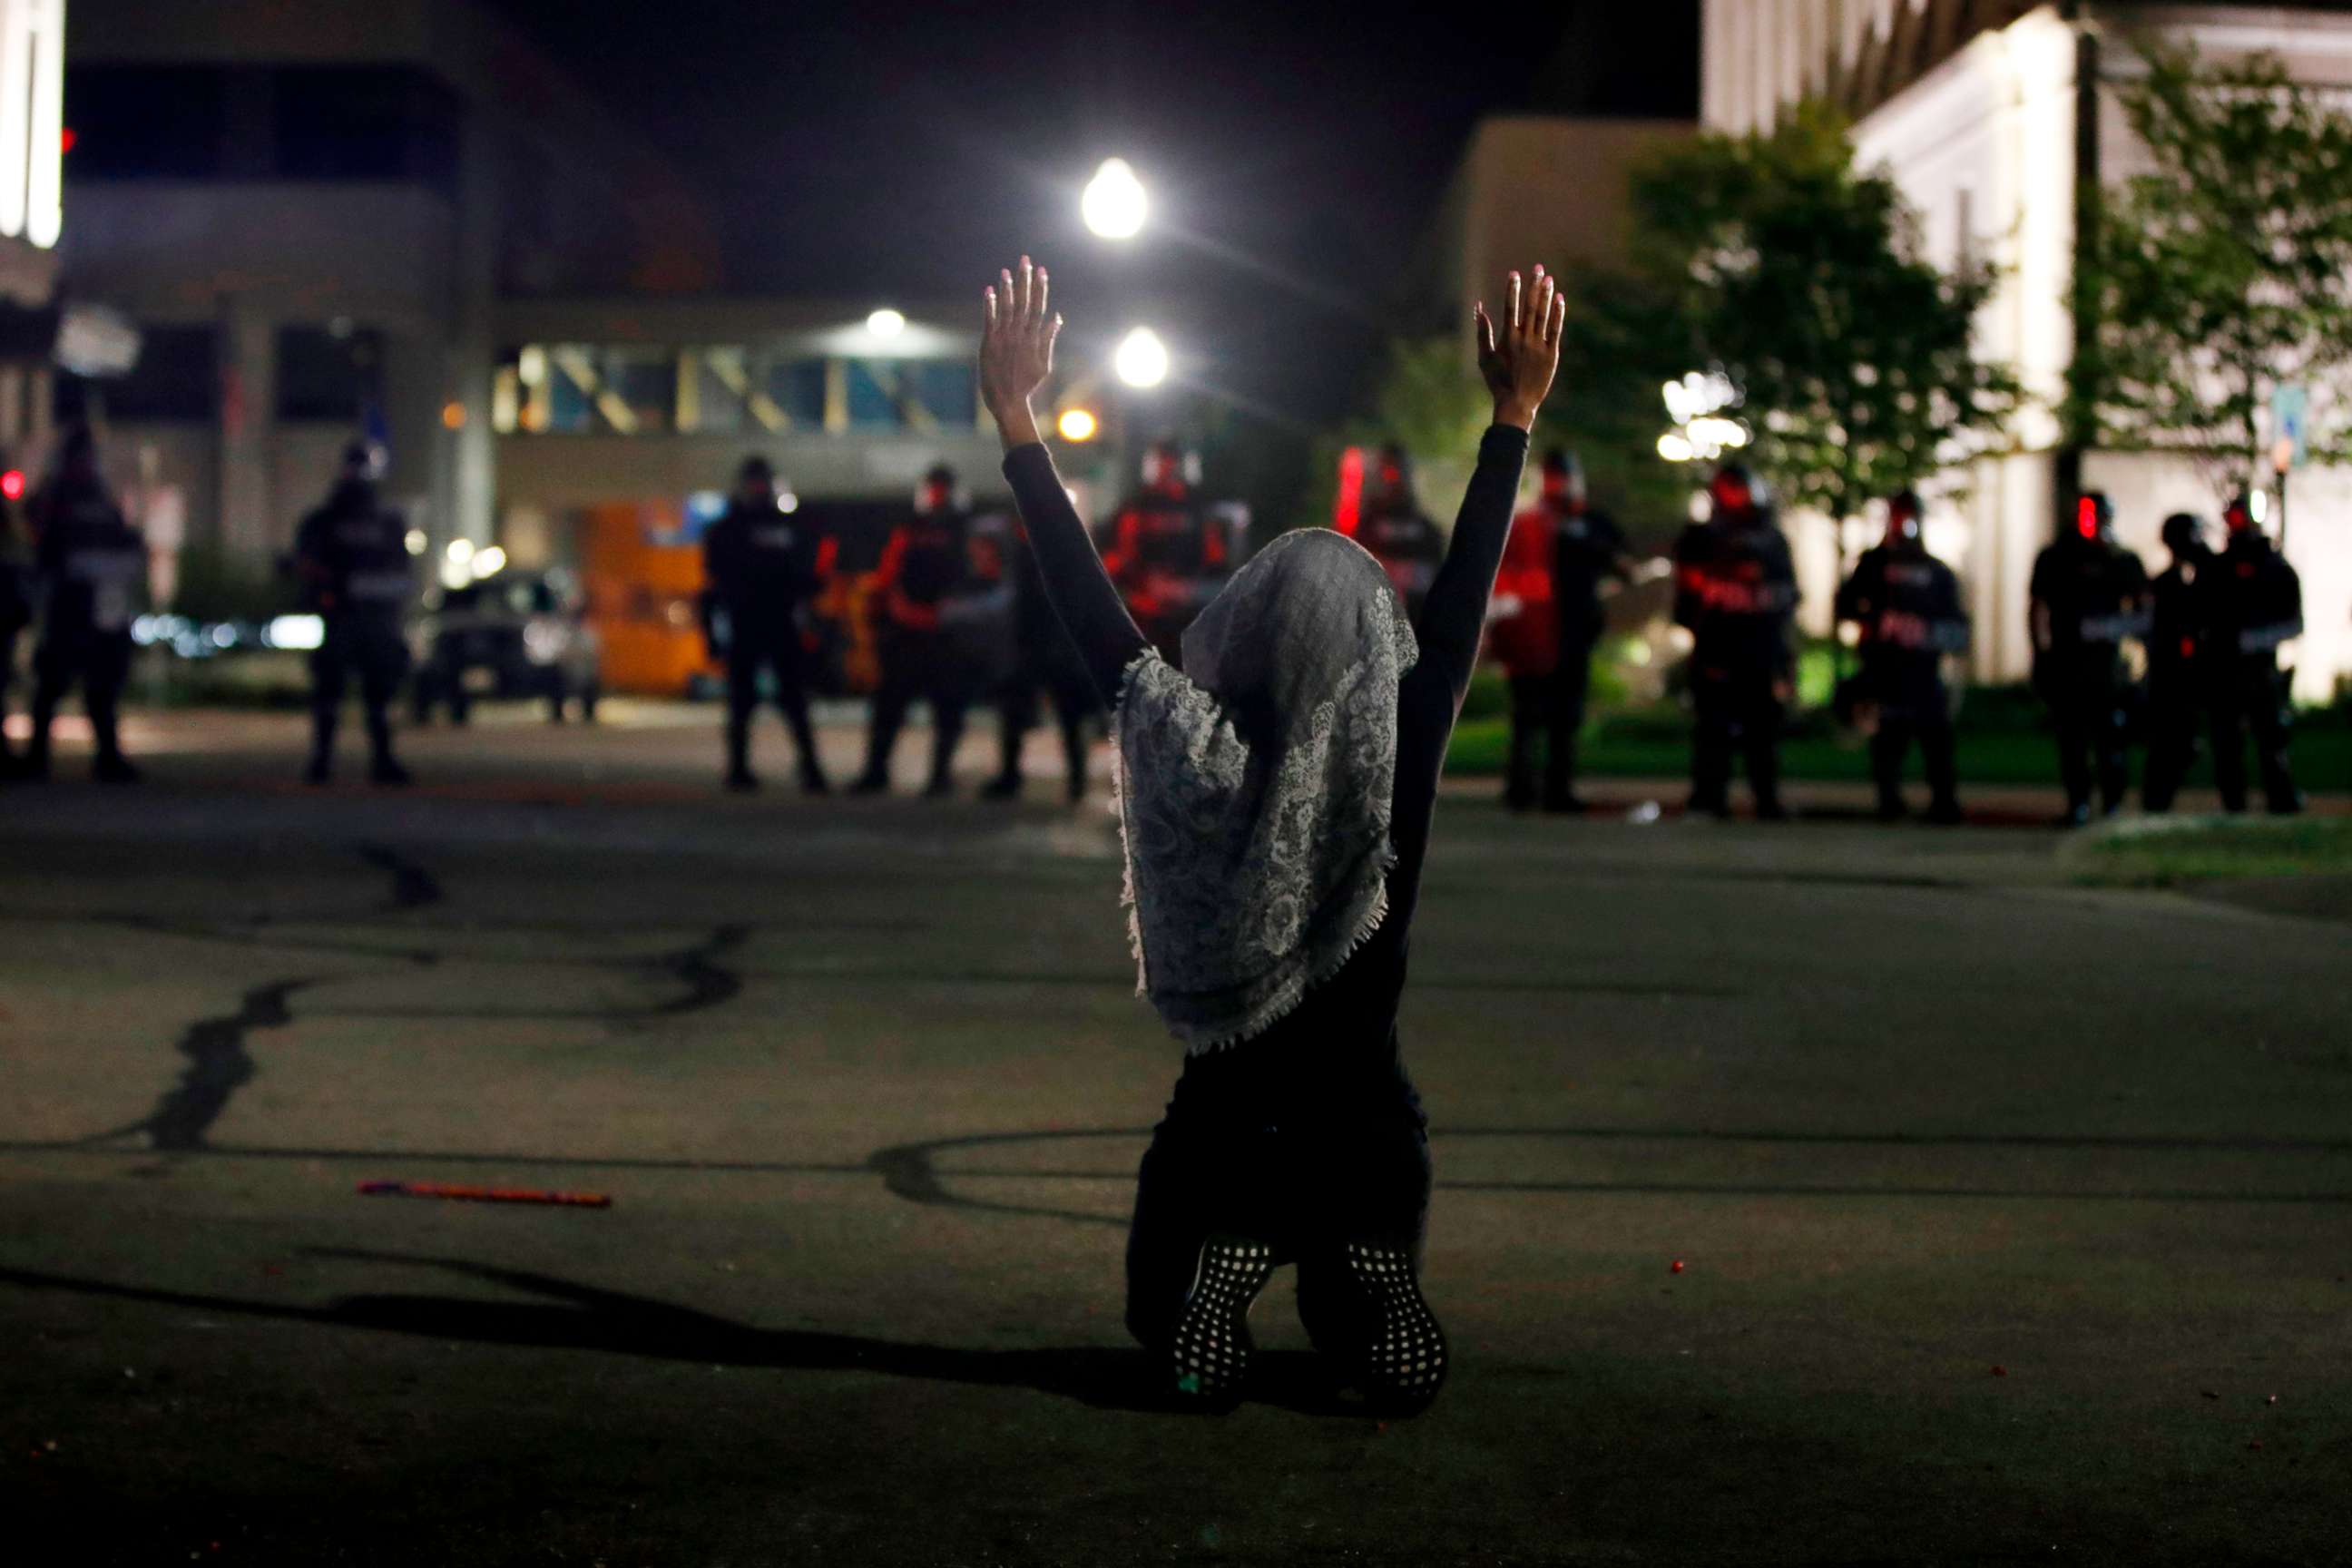 PHOTO: A protester holds her hands up as she kneels in front of Kenosha County Sheriff's officers by the County Court House during demonstrations against the shooting of Jacob Blake in Kenosha, Wisc., on Aug. 24, 2020.